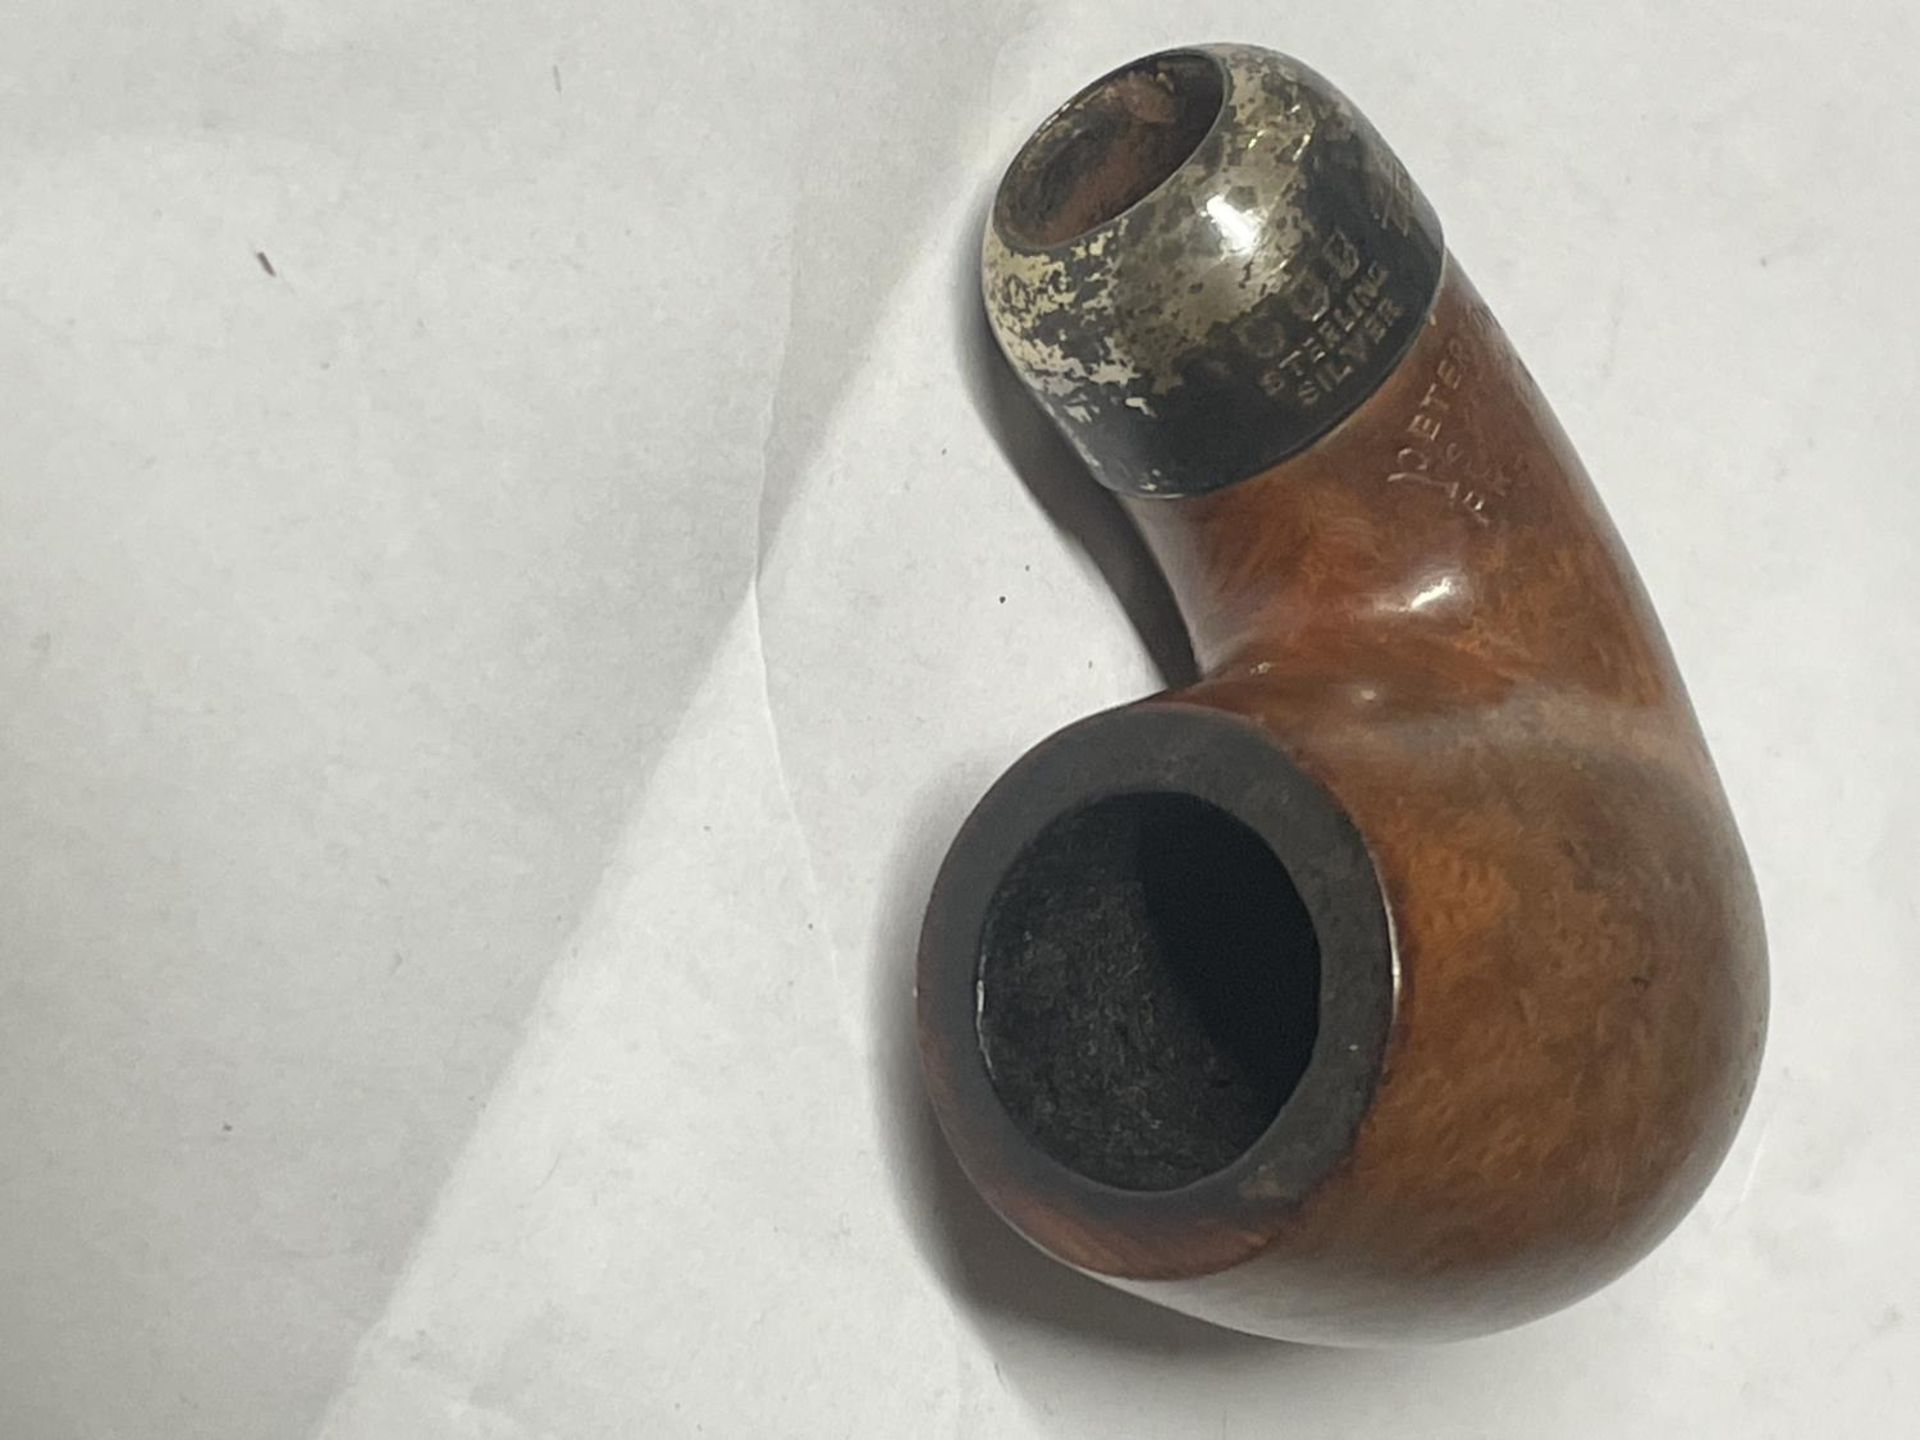 A PETERSONS SYSTEM PREMIER 317 PIPE BOWL DUBLIN WITH STERLING SILVER COLLAR - Image 2 of 3